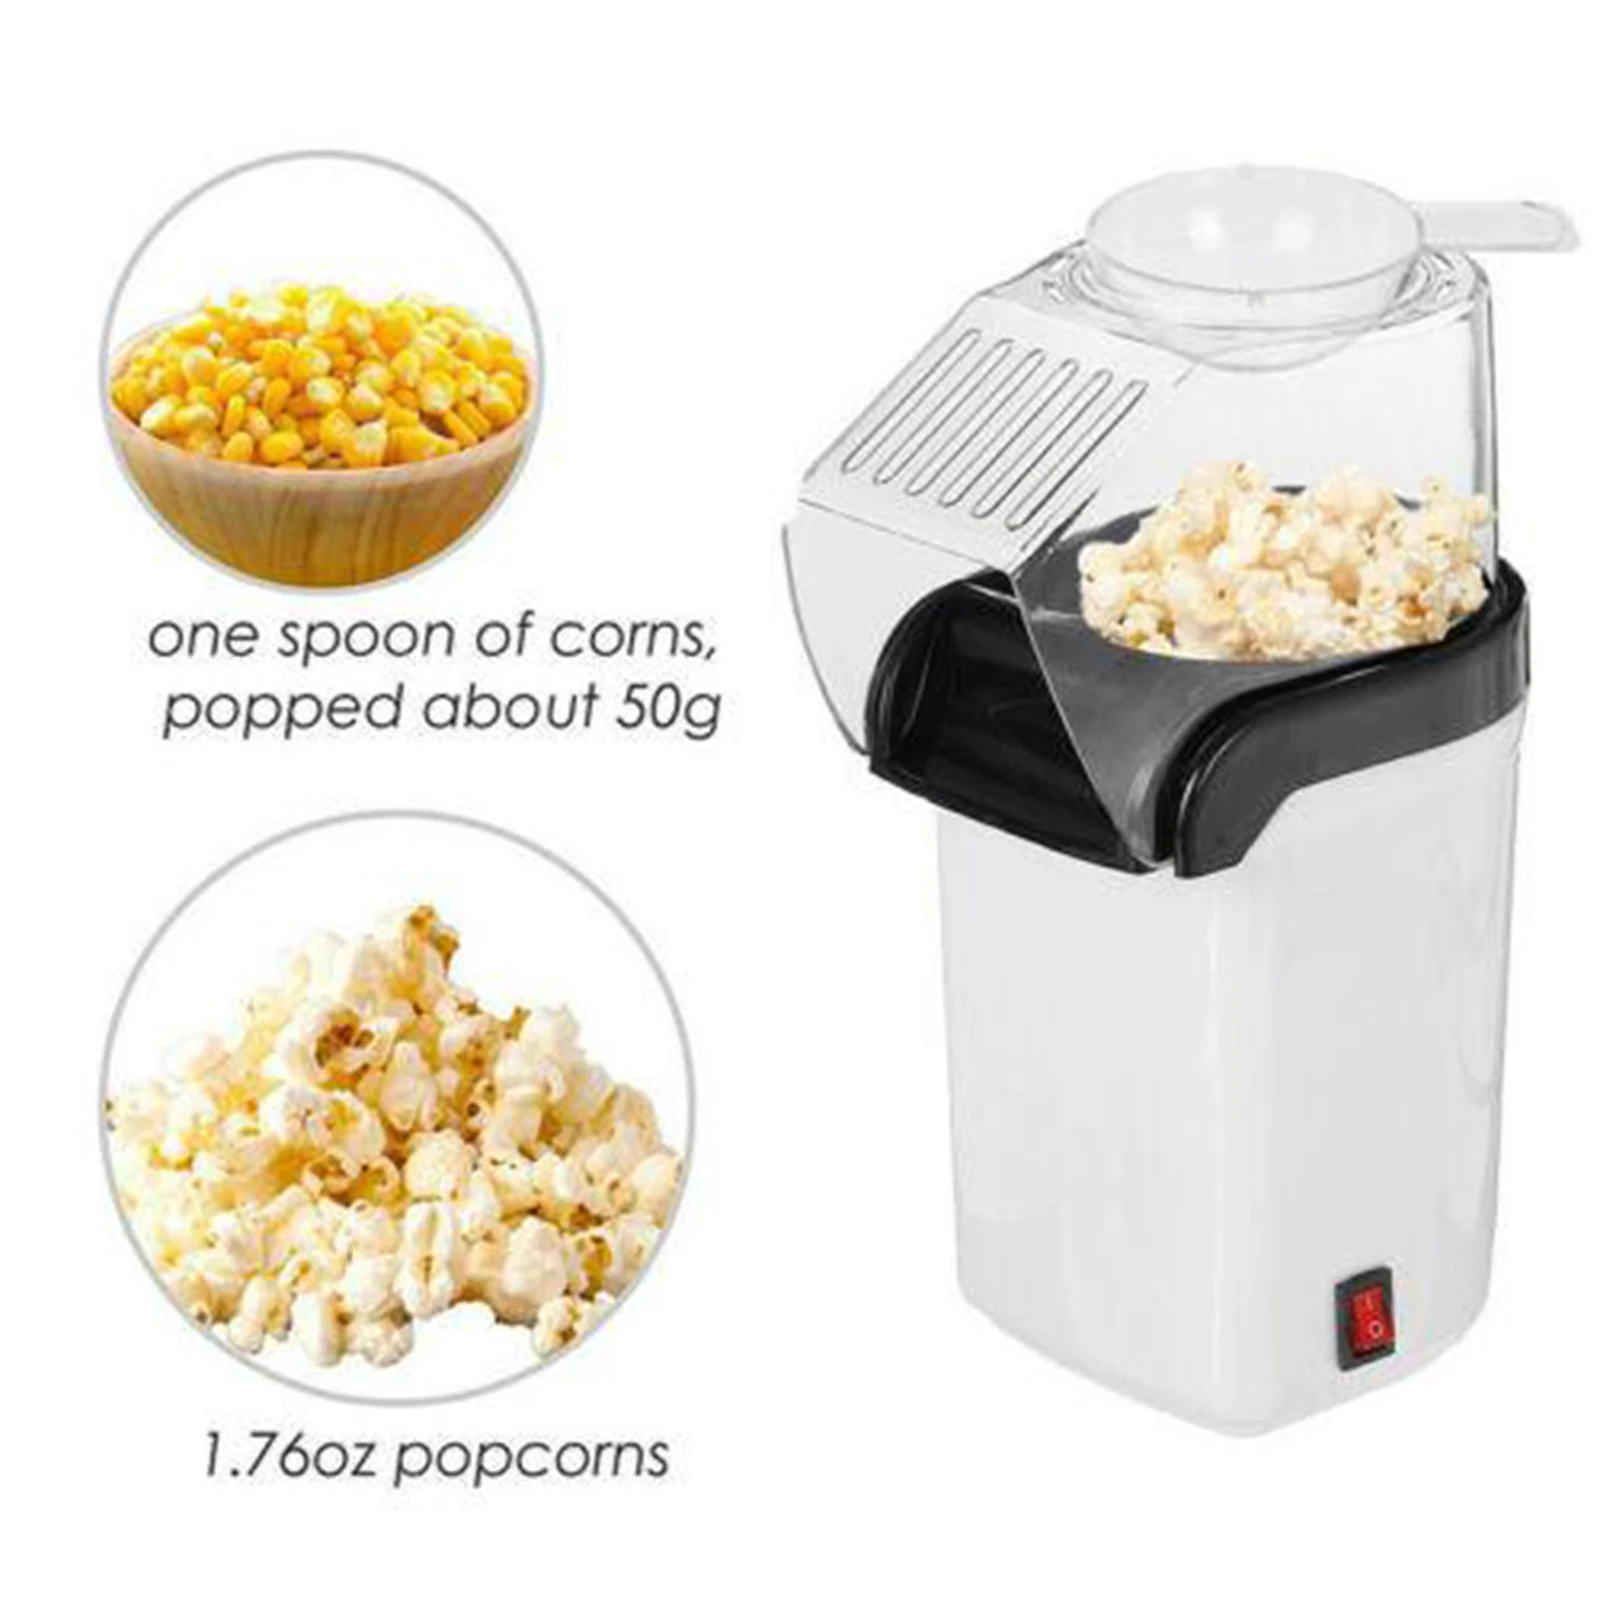 Hot Air Popcorn Machine, 1200W Electric Popcorn Maker, BPA-Free, 3 Minutes Fast Popcorn Popper and Top Lid for Home, Family